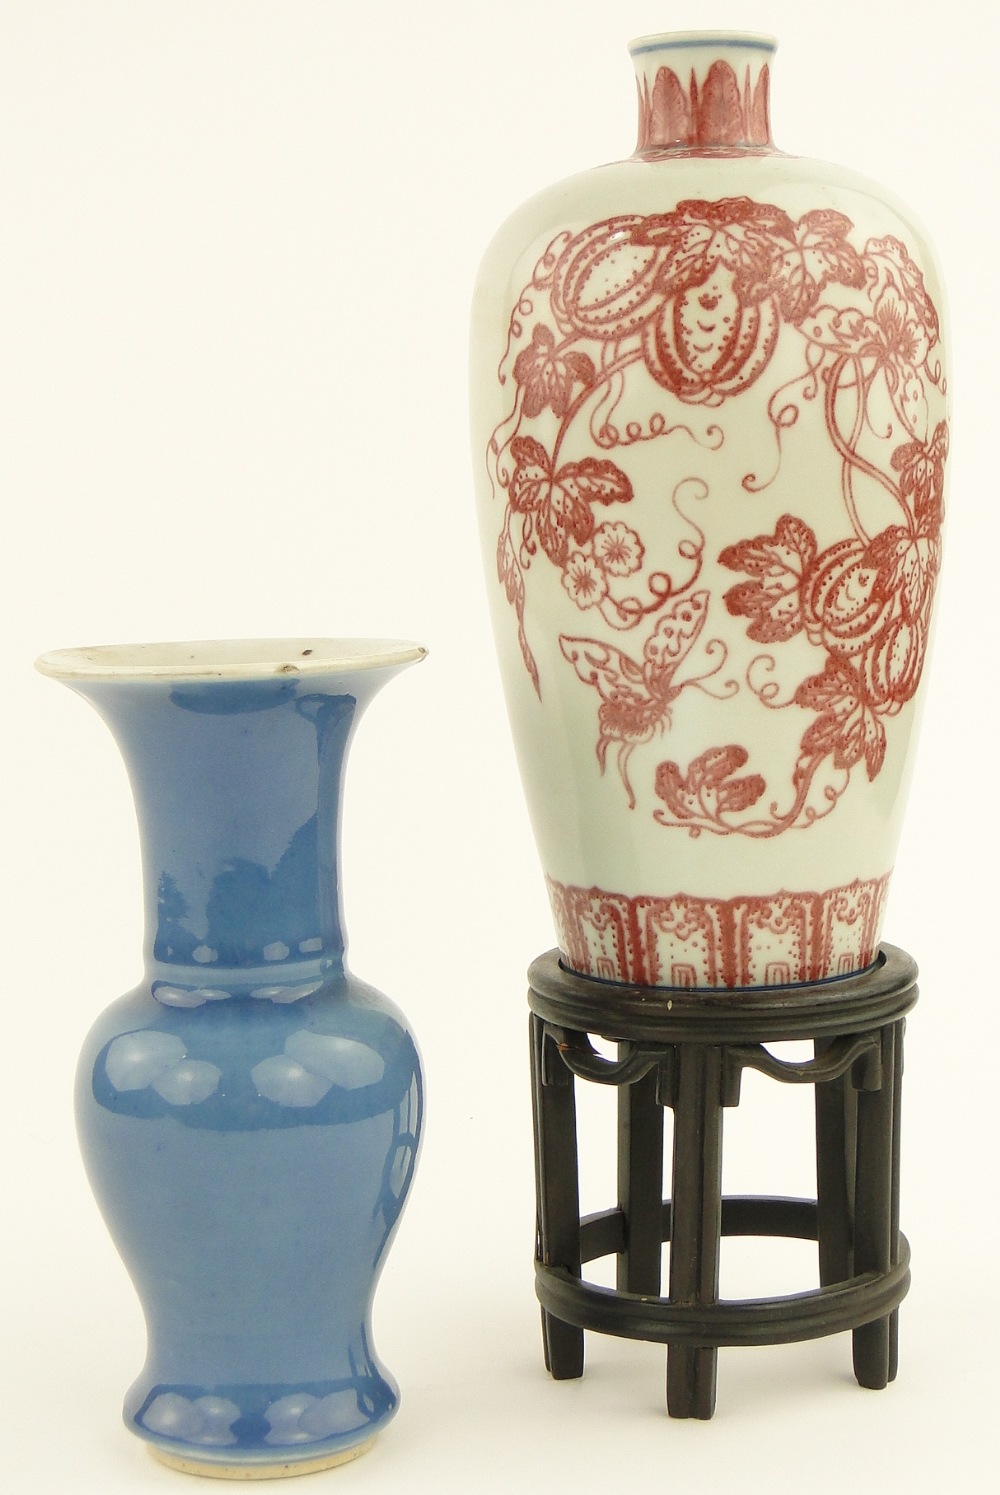 A Chinese porcelain copper red vase
with 6 character mark, 9.5", with wooden stand, and a blue